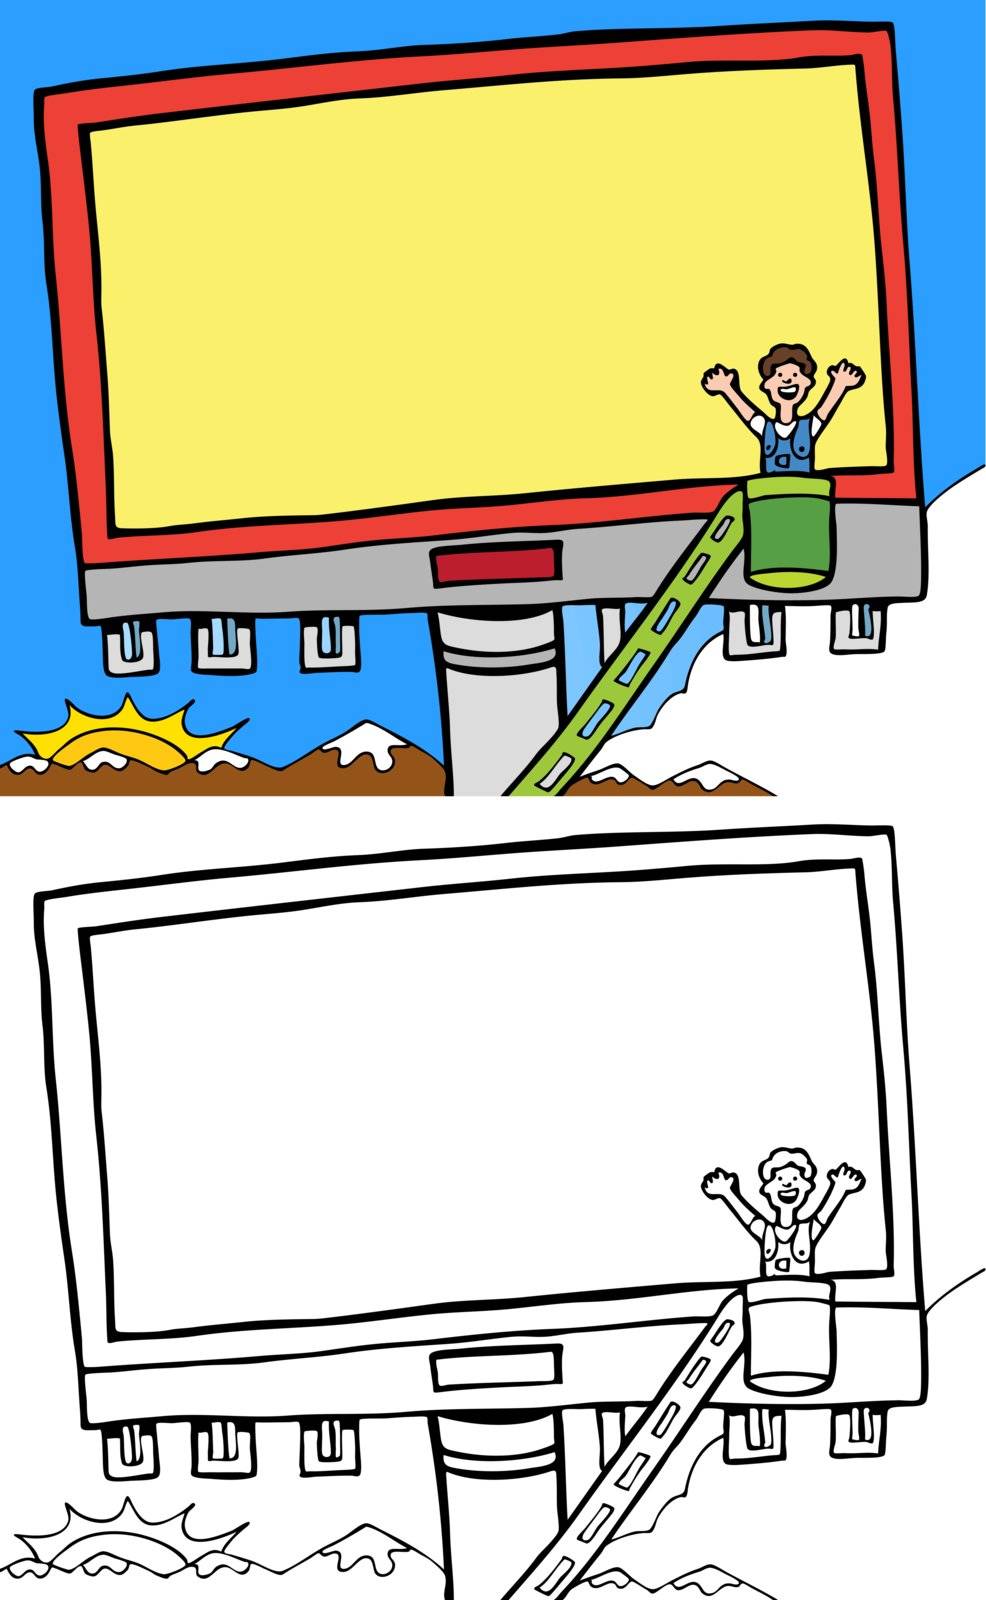 Cartoon image of worker putting up an advertisement on a billboard - both color and black / white versions.